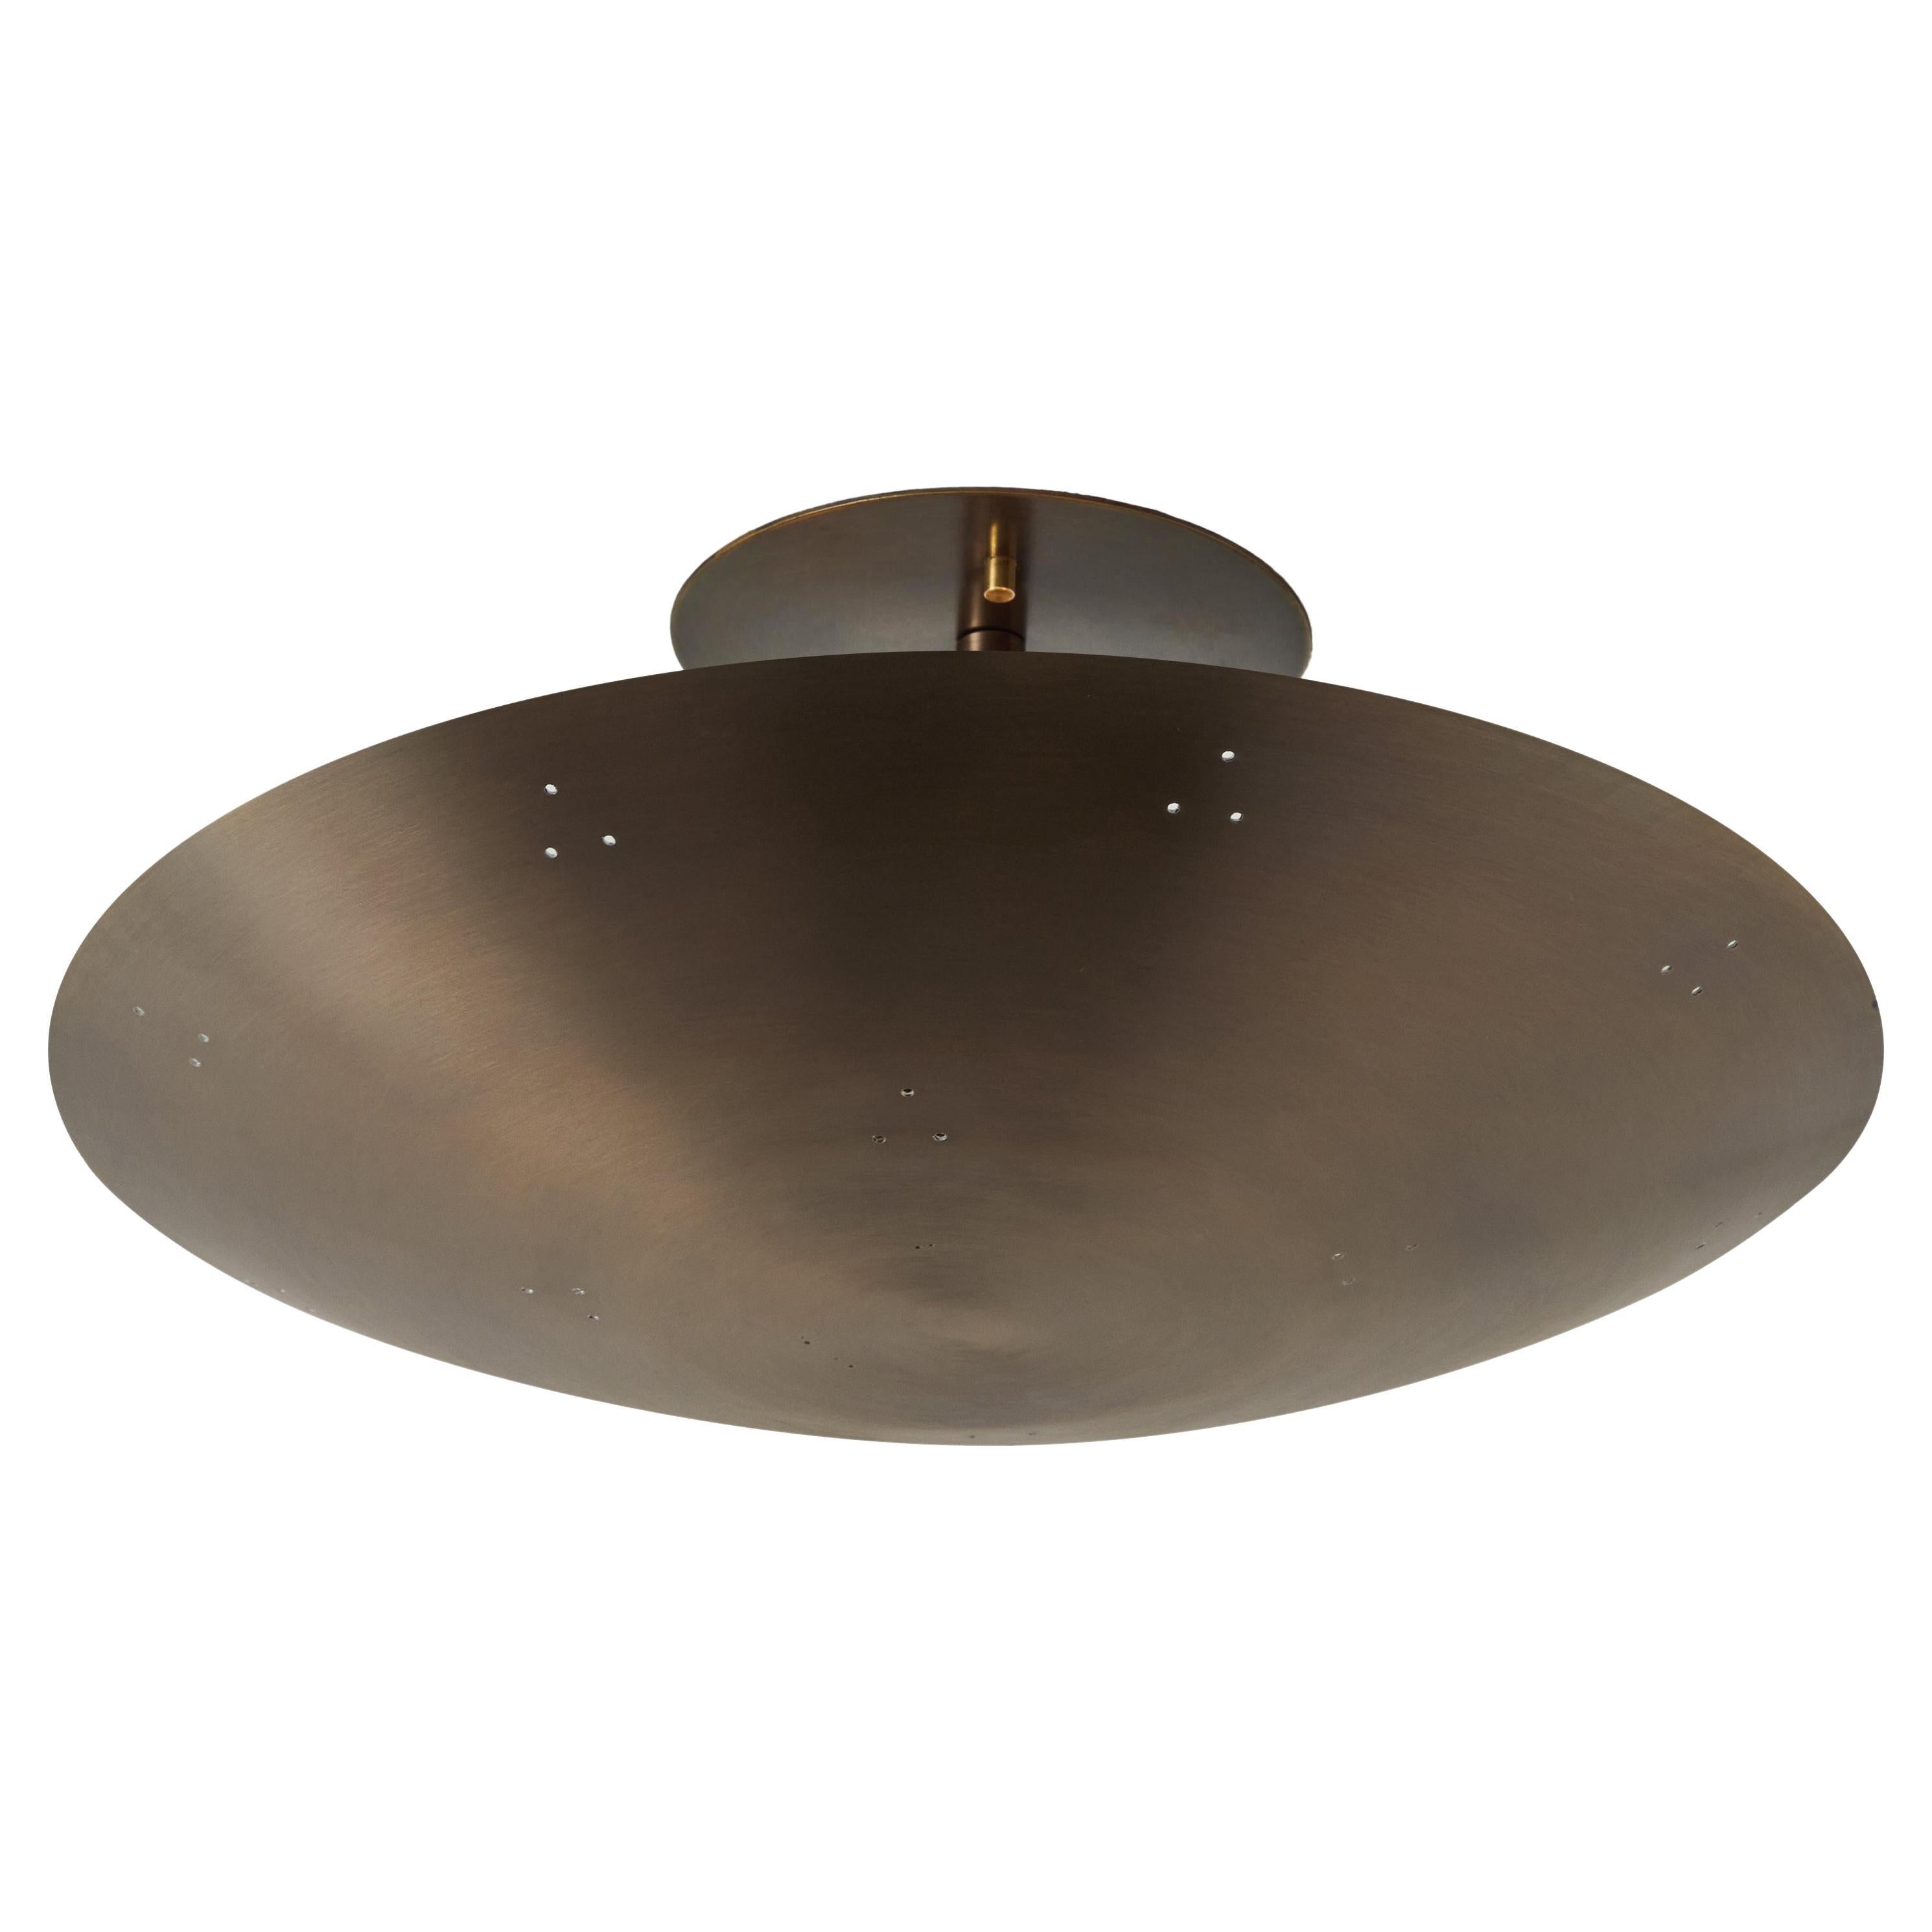 Two Enlighten 'Rey 14' Perforated Patinated Brass Dome Ceiling Lamp